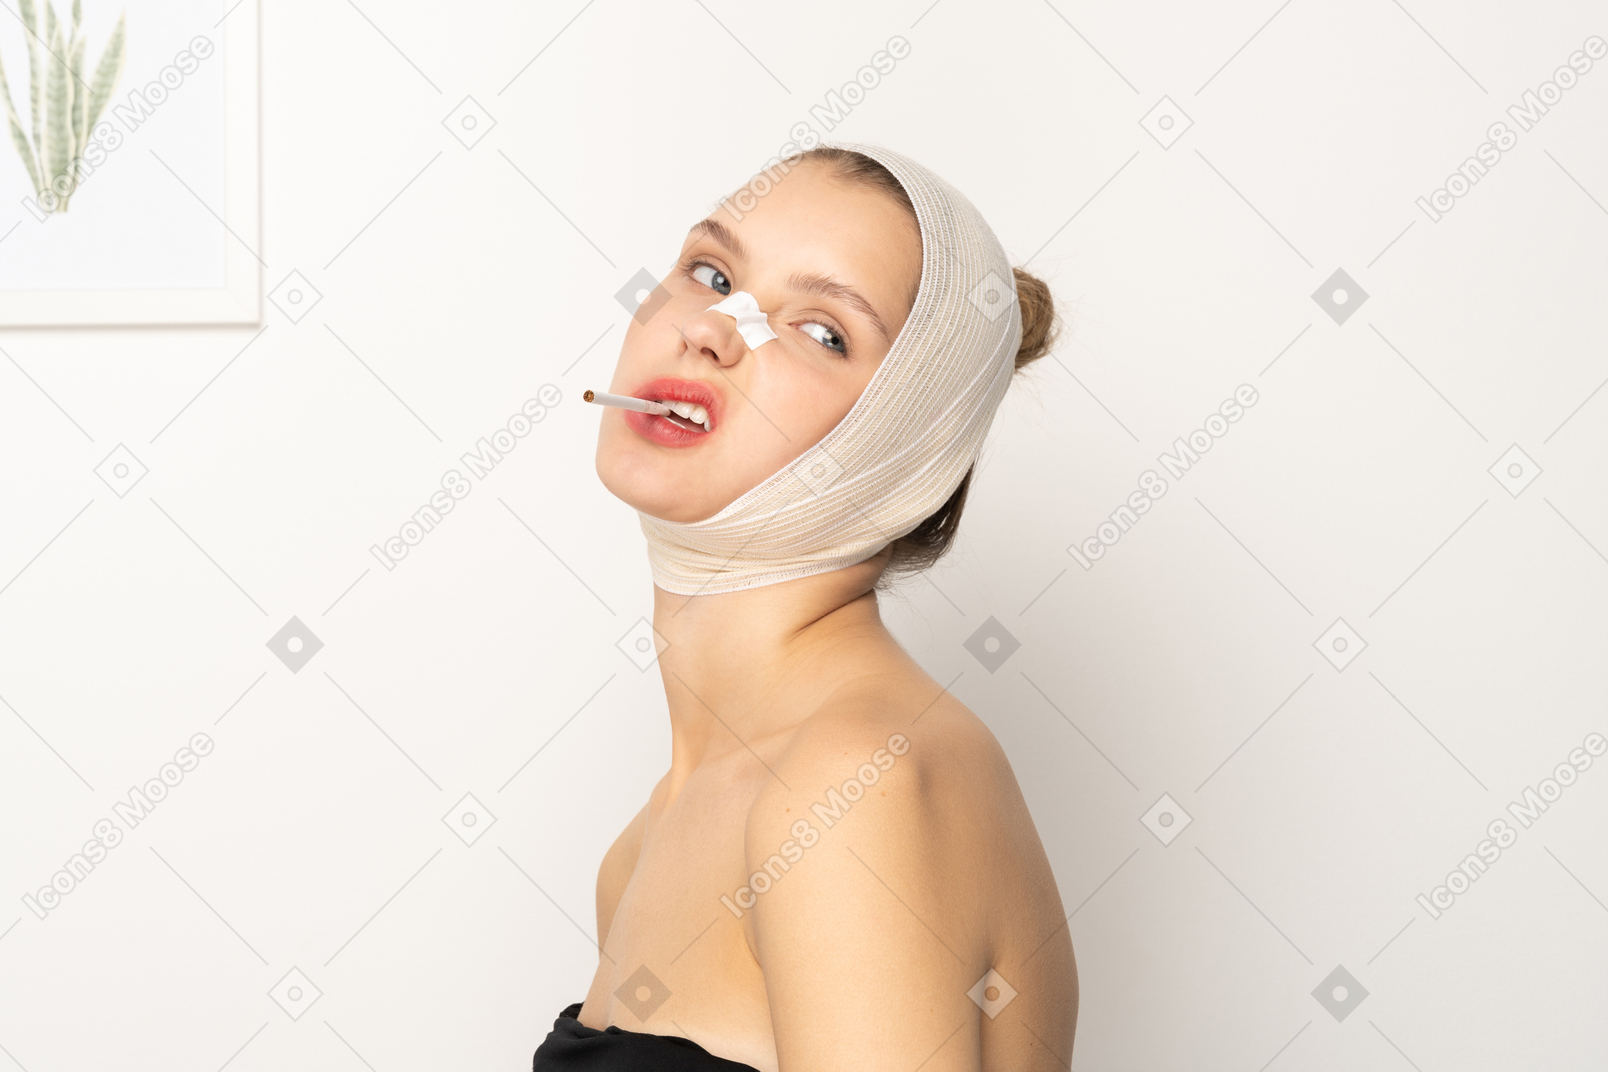 Young woman with head bandage and cigarette in her mouth